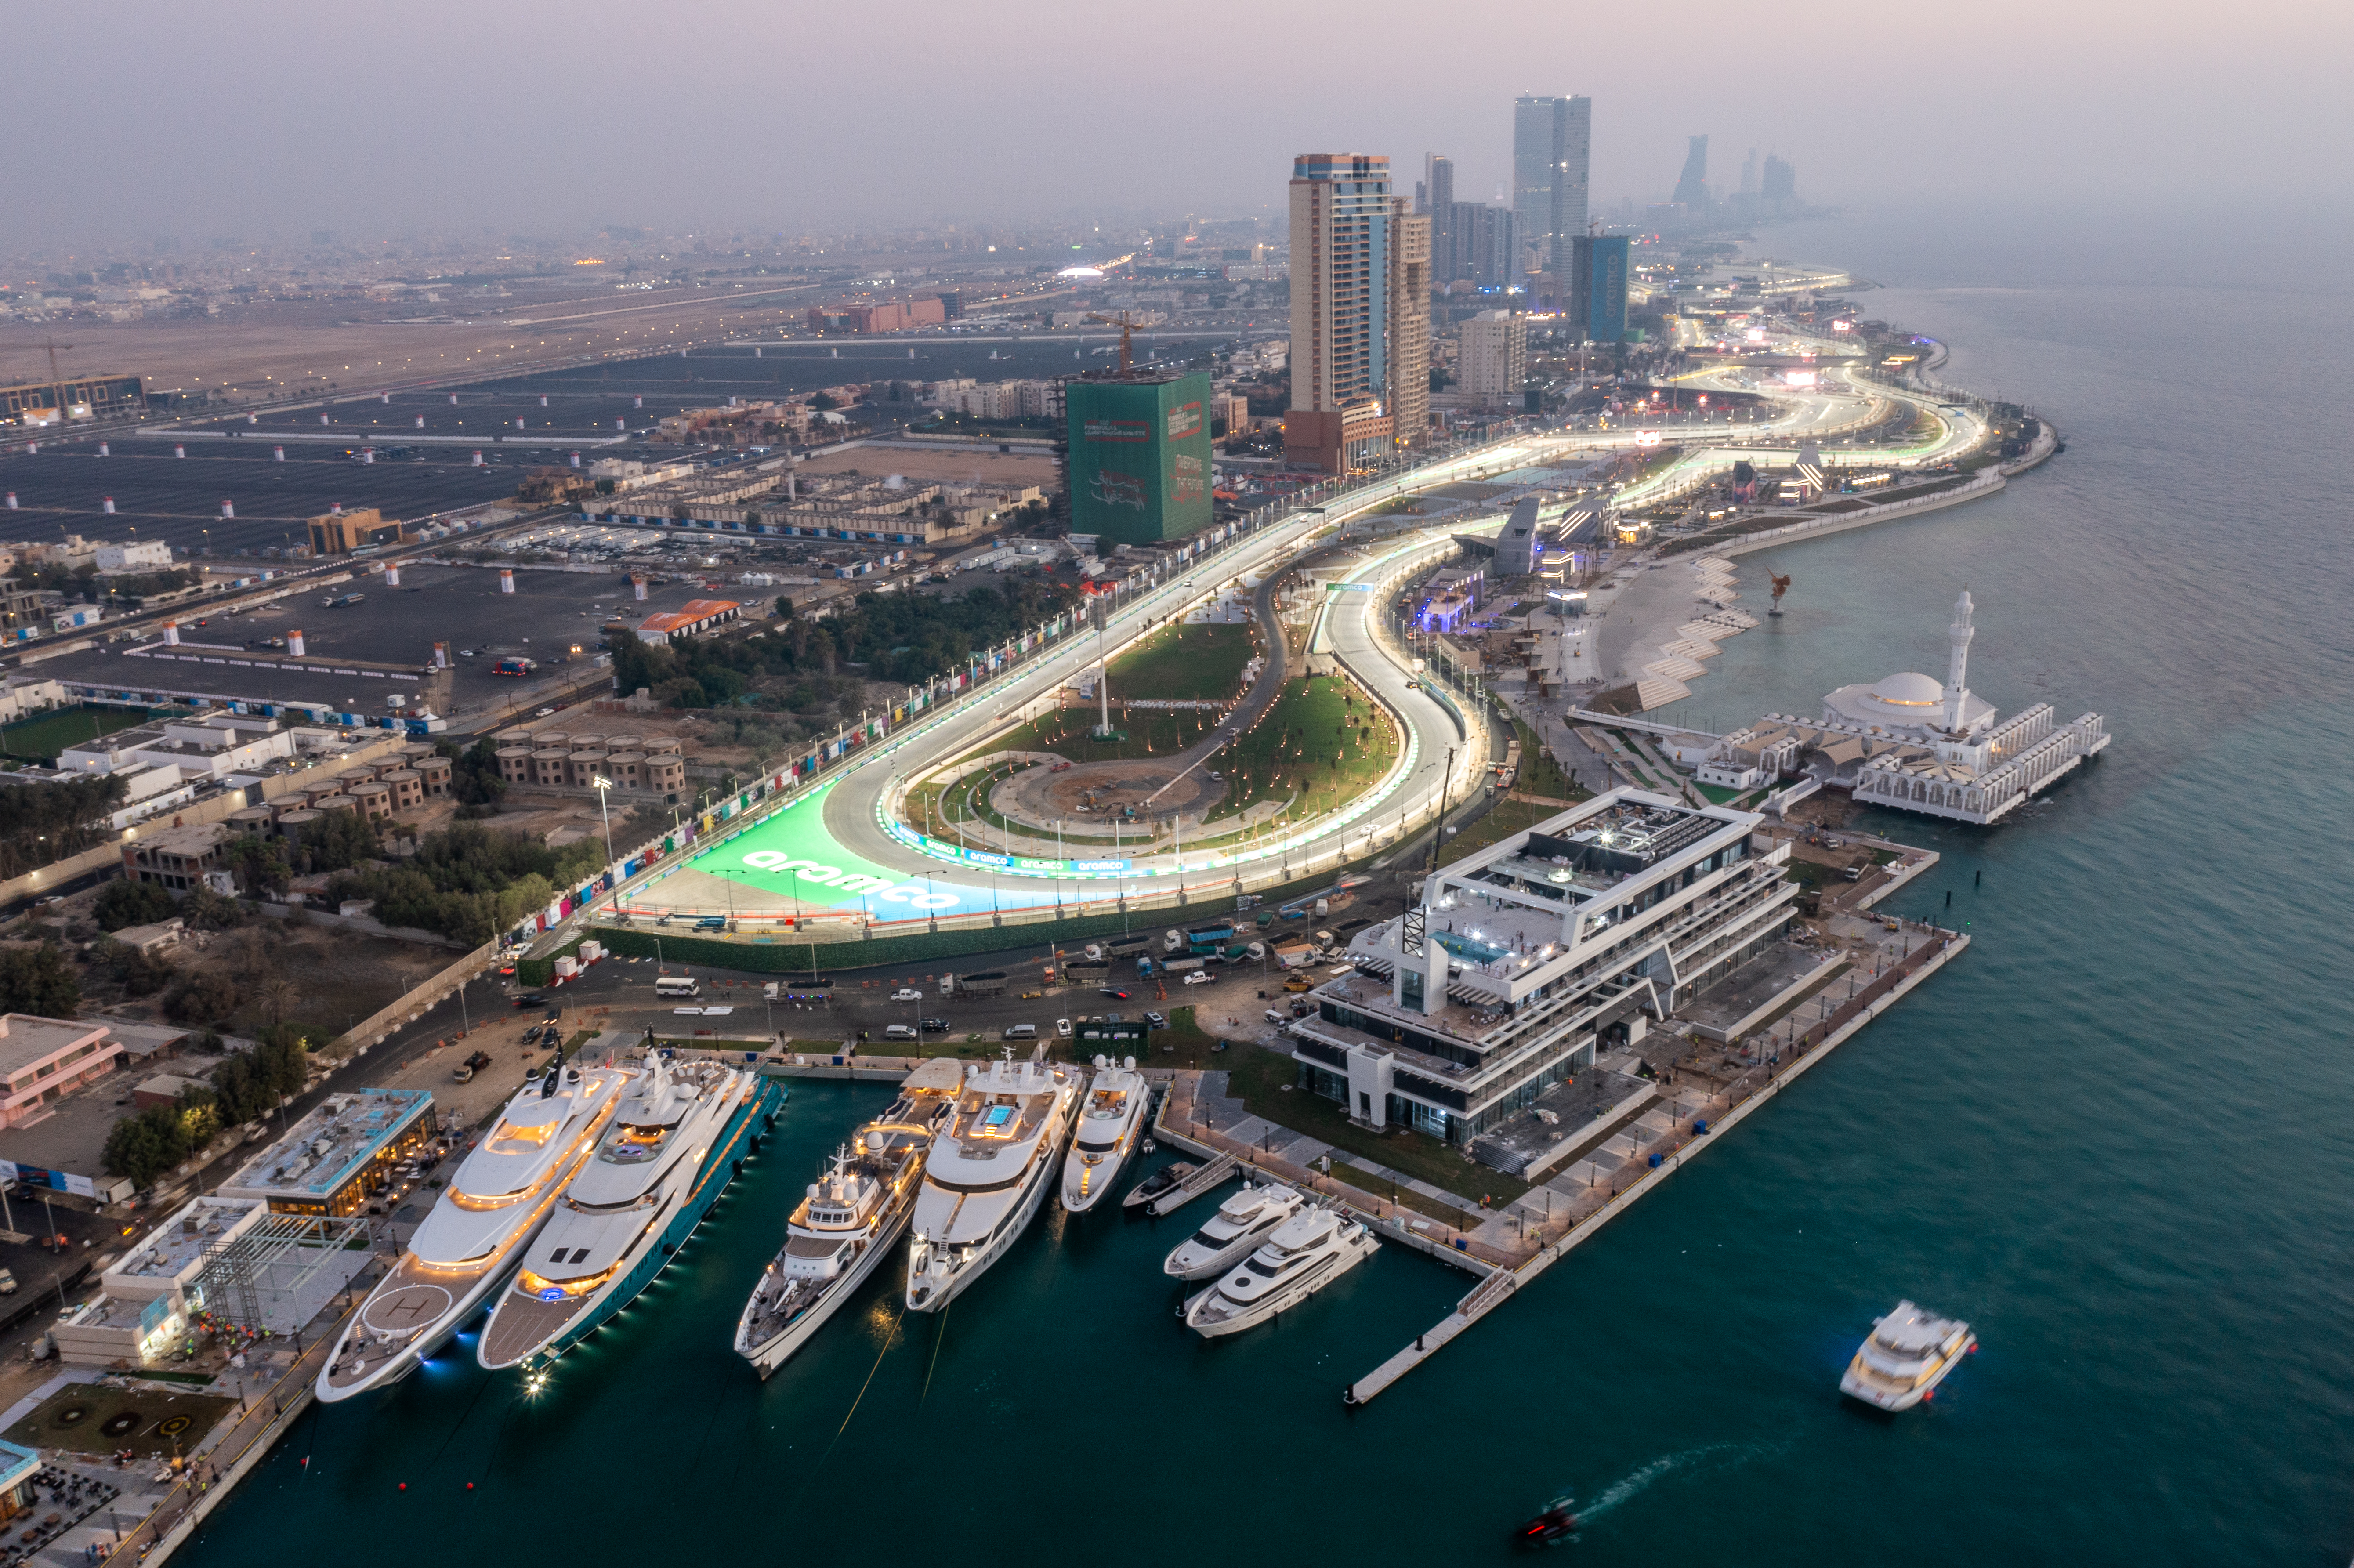 Jeddah Yacht Club and Marina Hosted Over 40 Superyachts During Saudi Arabia  F1 Grand Prix Weekend - Yacht Harbour